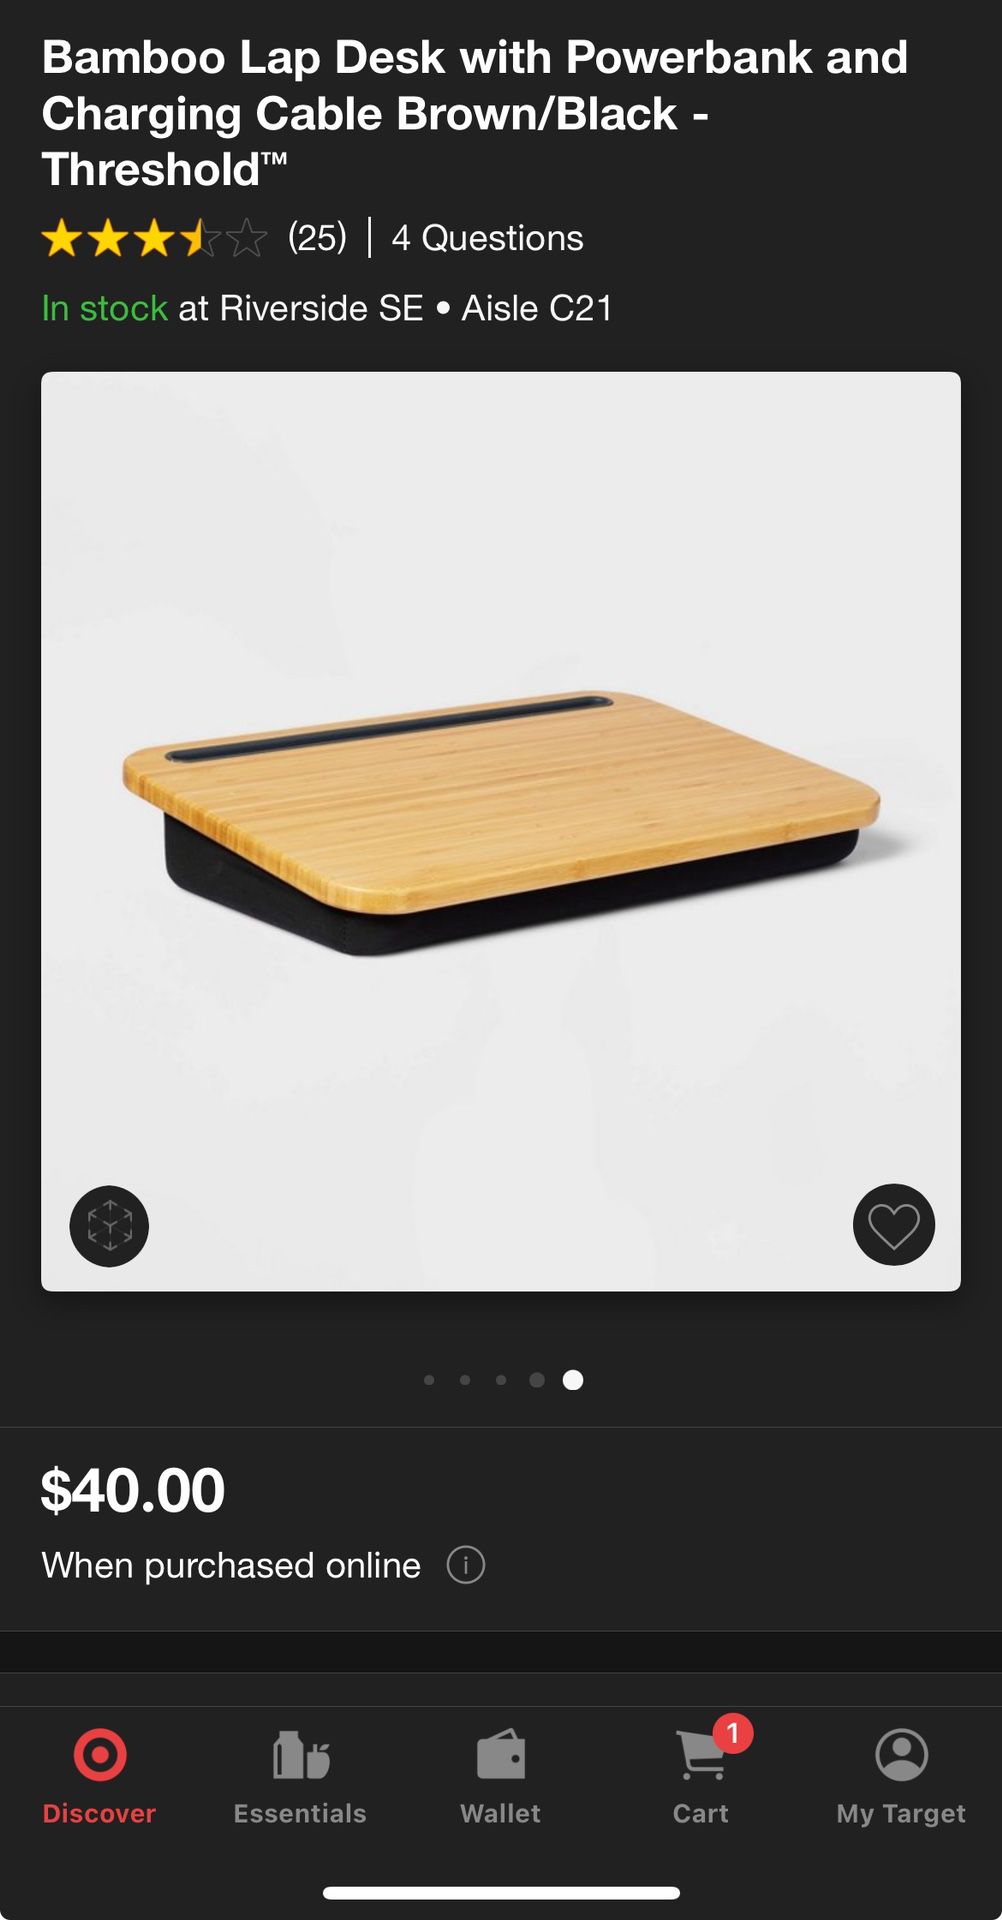 Bamboo Lap Desk with Powerbank and Charging Cable Brown/Black 